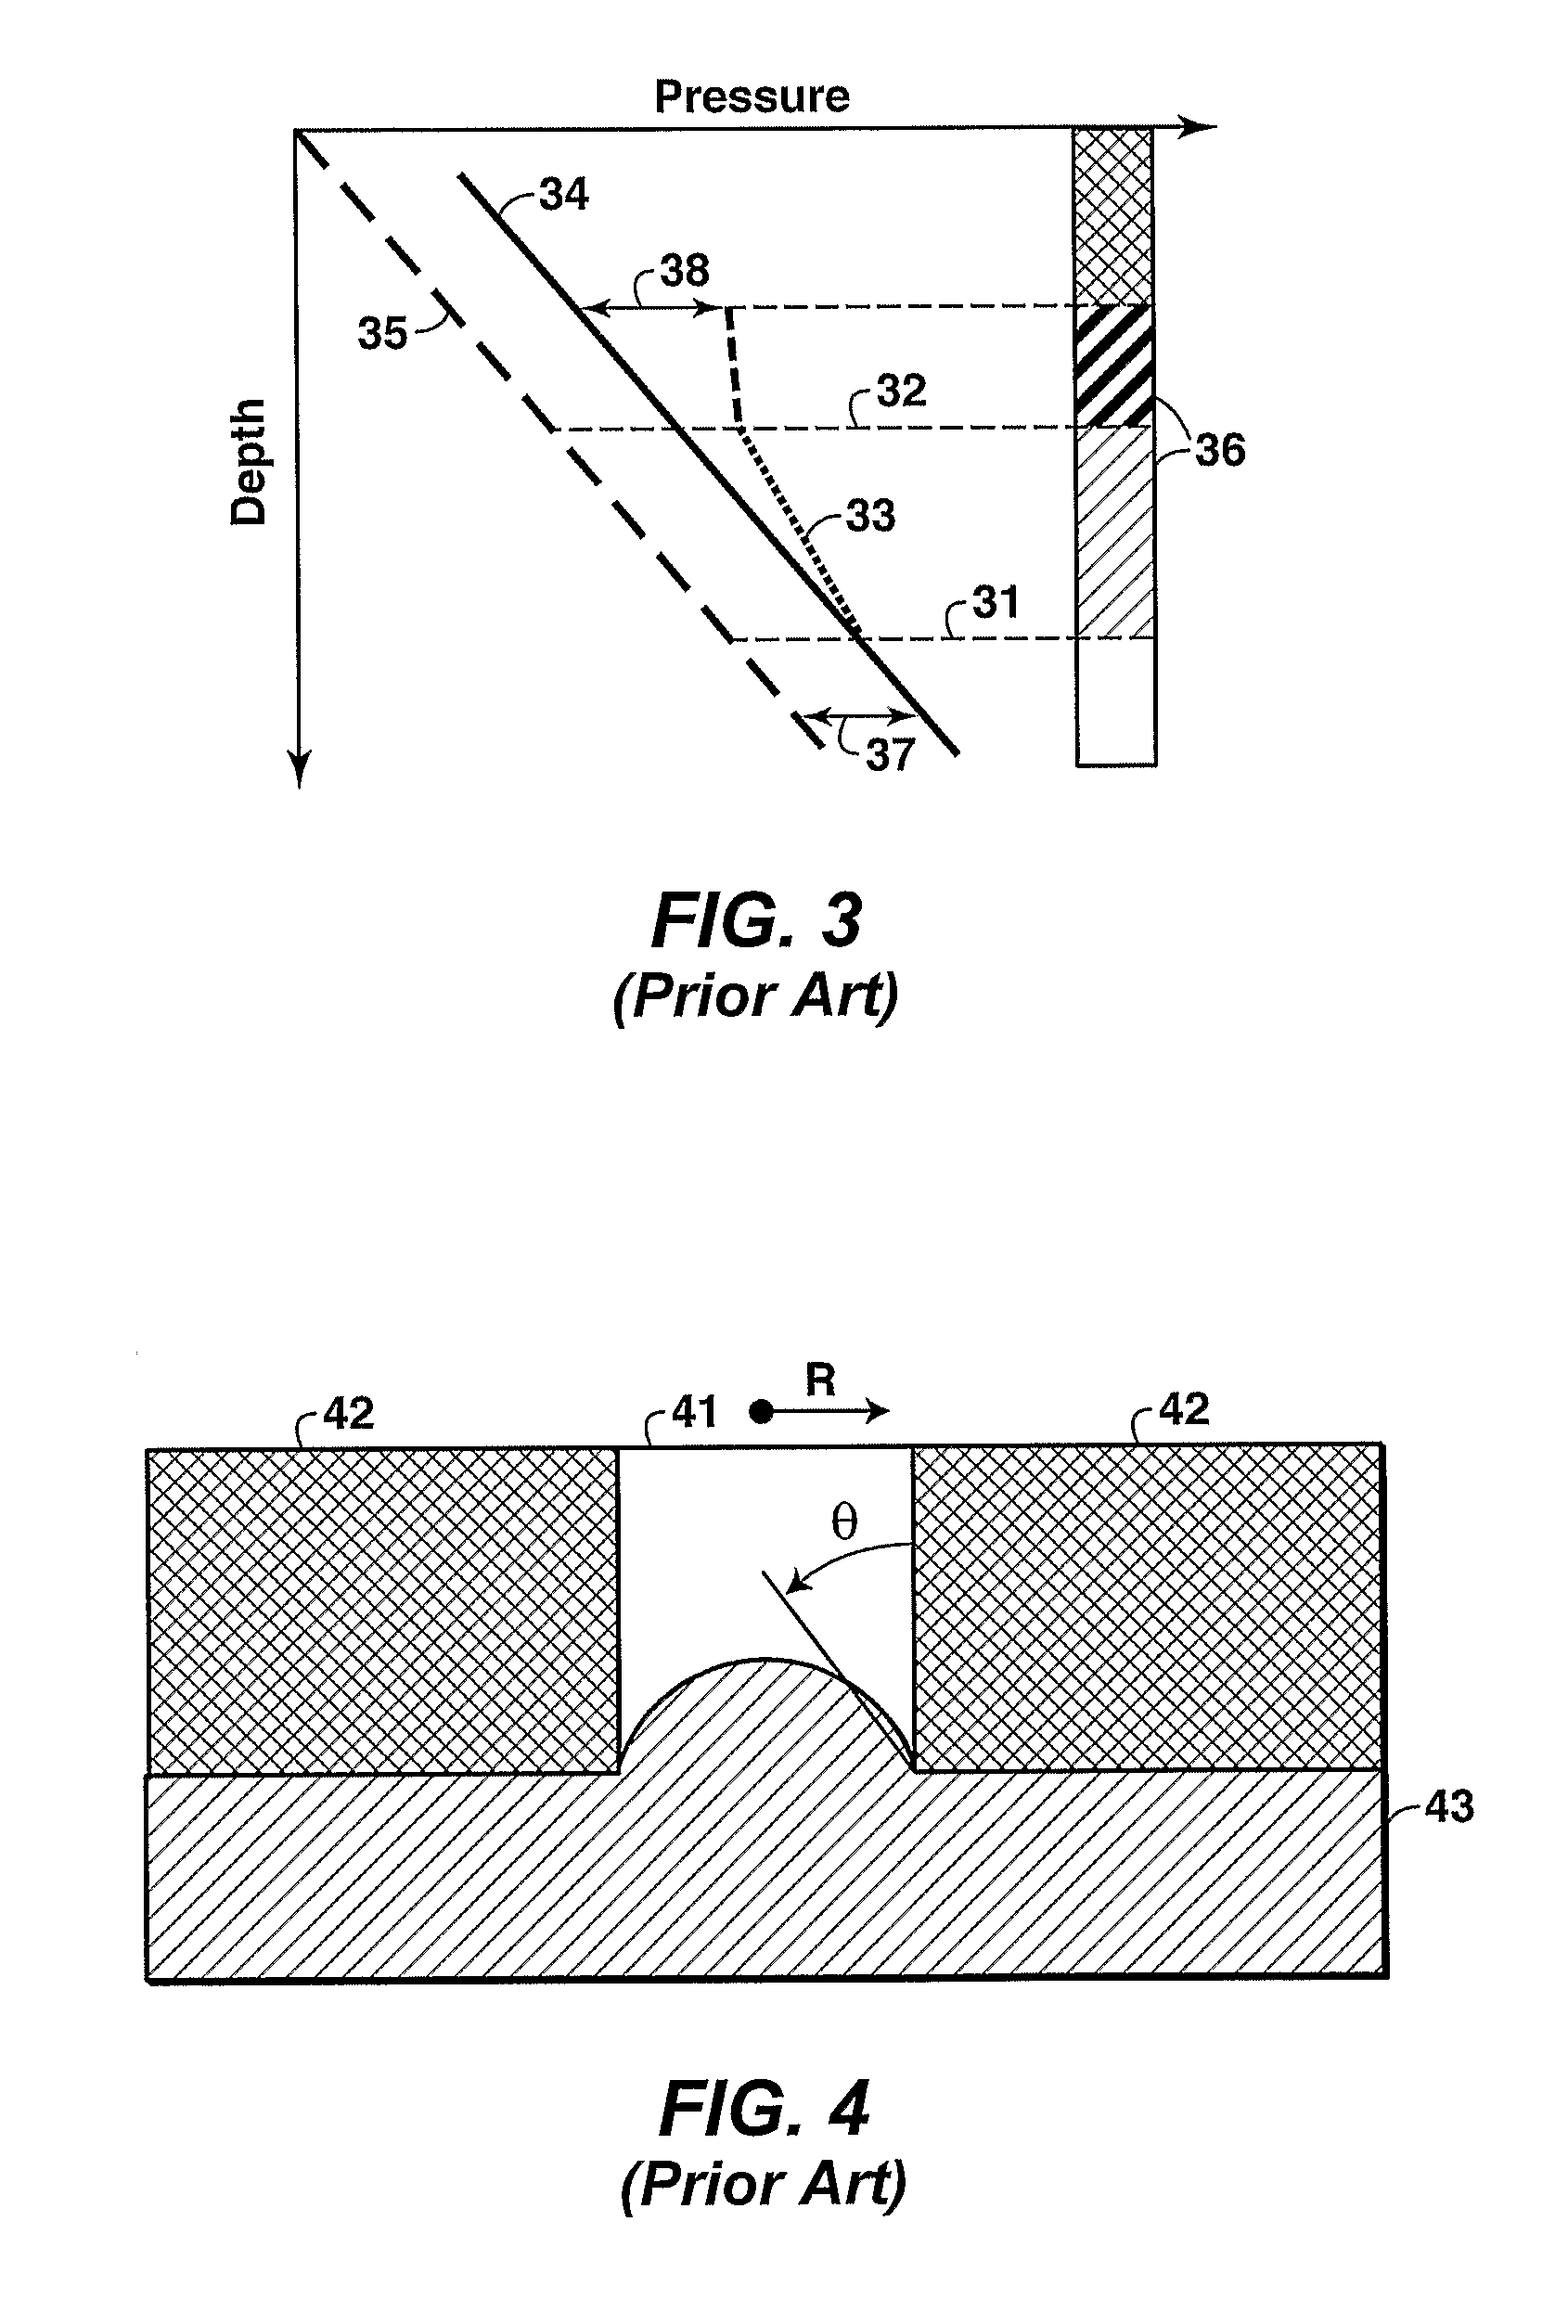 Method for mechanical and capillary seal analysis of a hydrocarbon trap